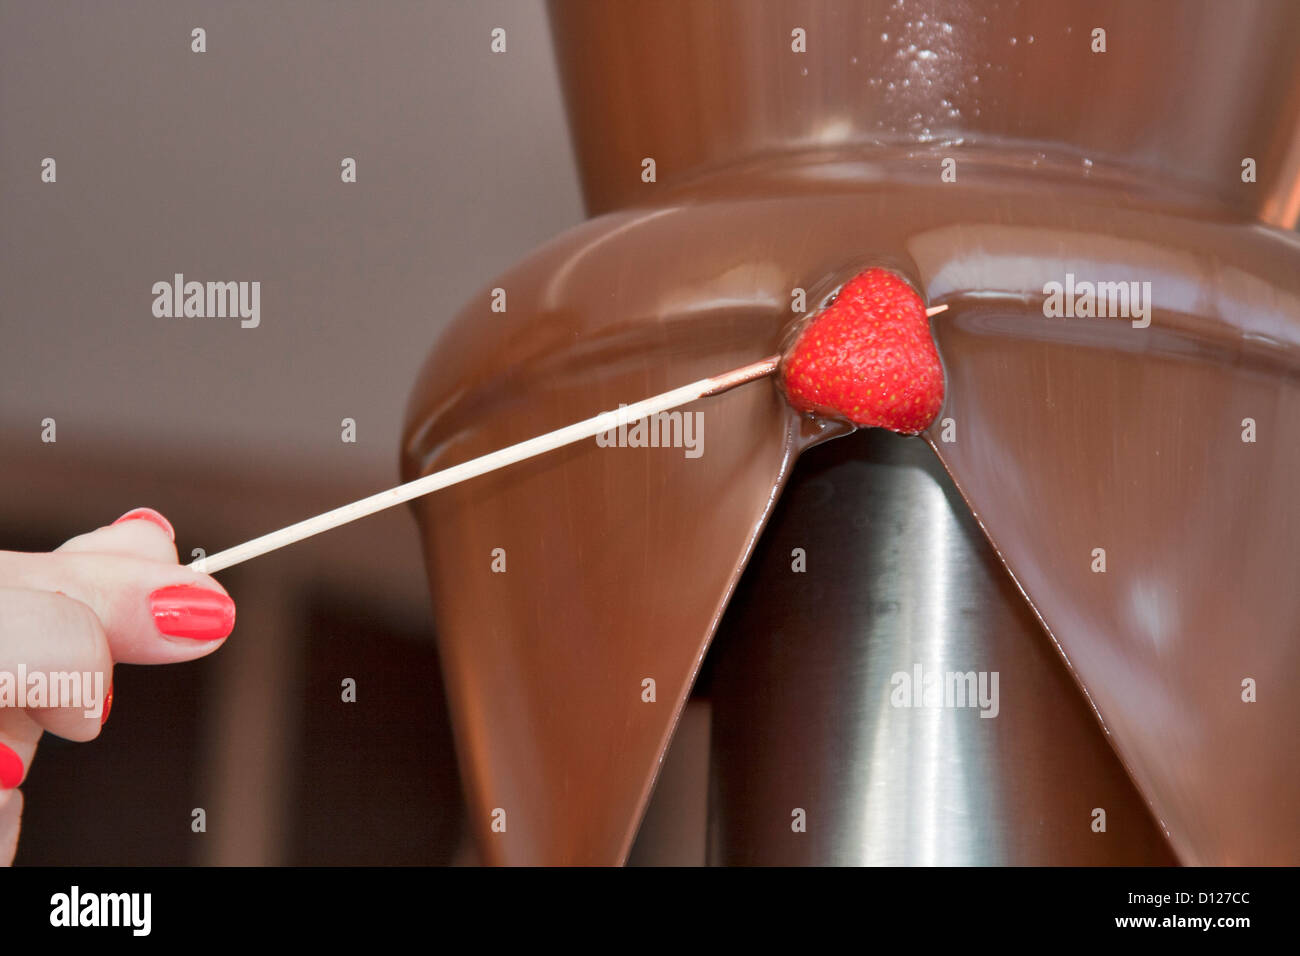 Strawberry that has just been freshly dipped in warm milk chocolate fondue. Stock Photo